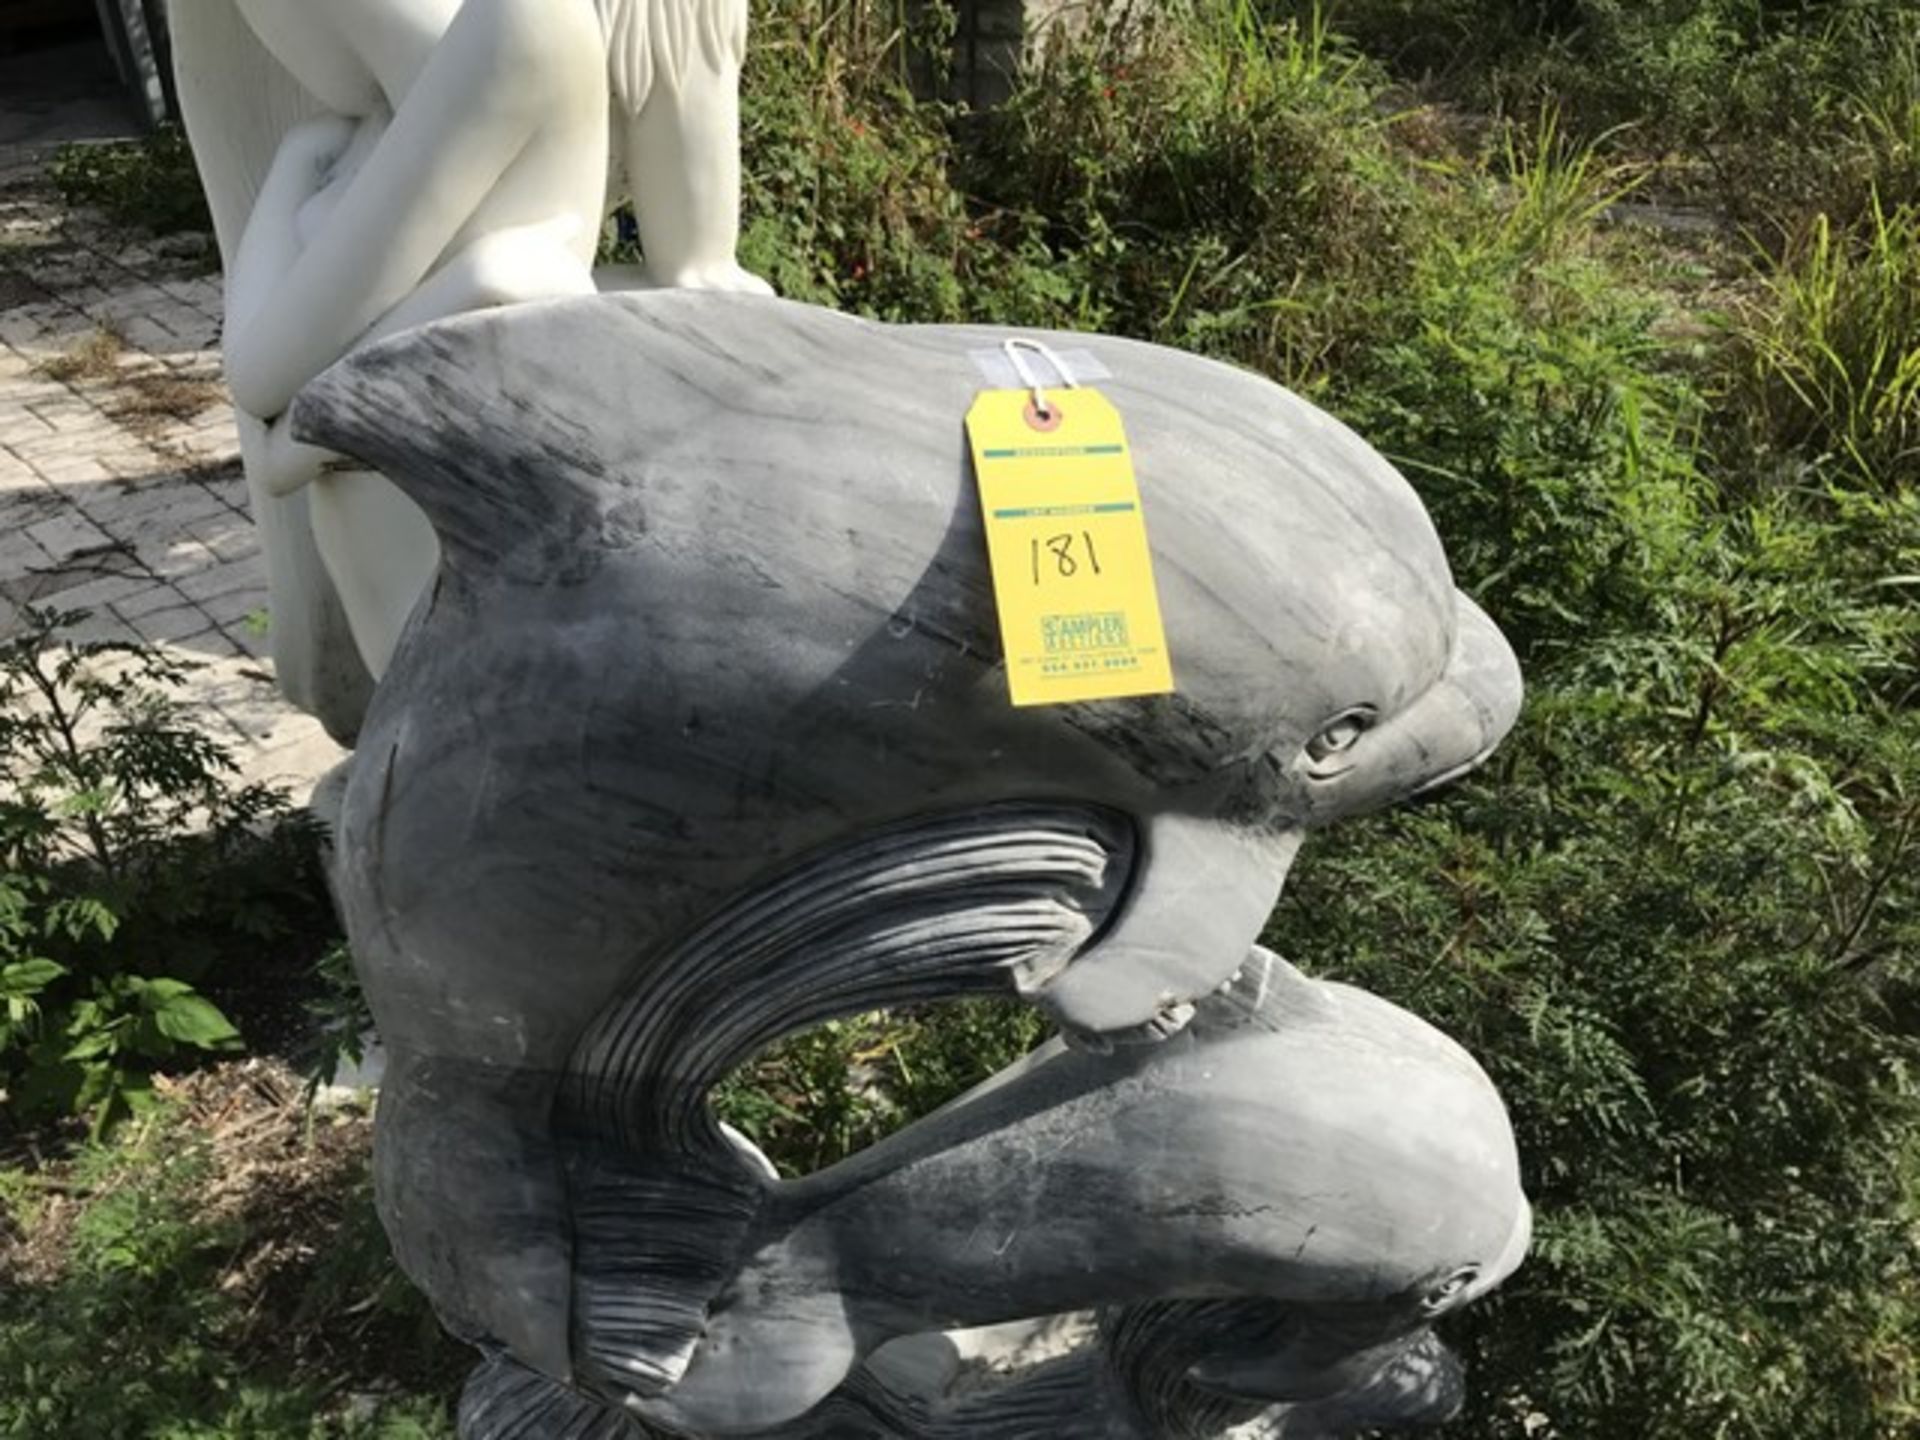 STONE STATUE - 3 DOLPHINS - APPROXIMATELY 42''x25''x12'' (FOB LOXAHATCHEE, FL) - Image 3 of 3